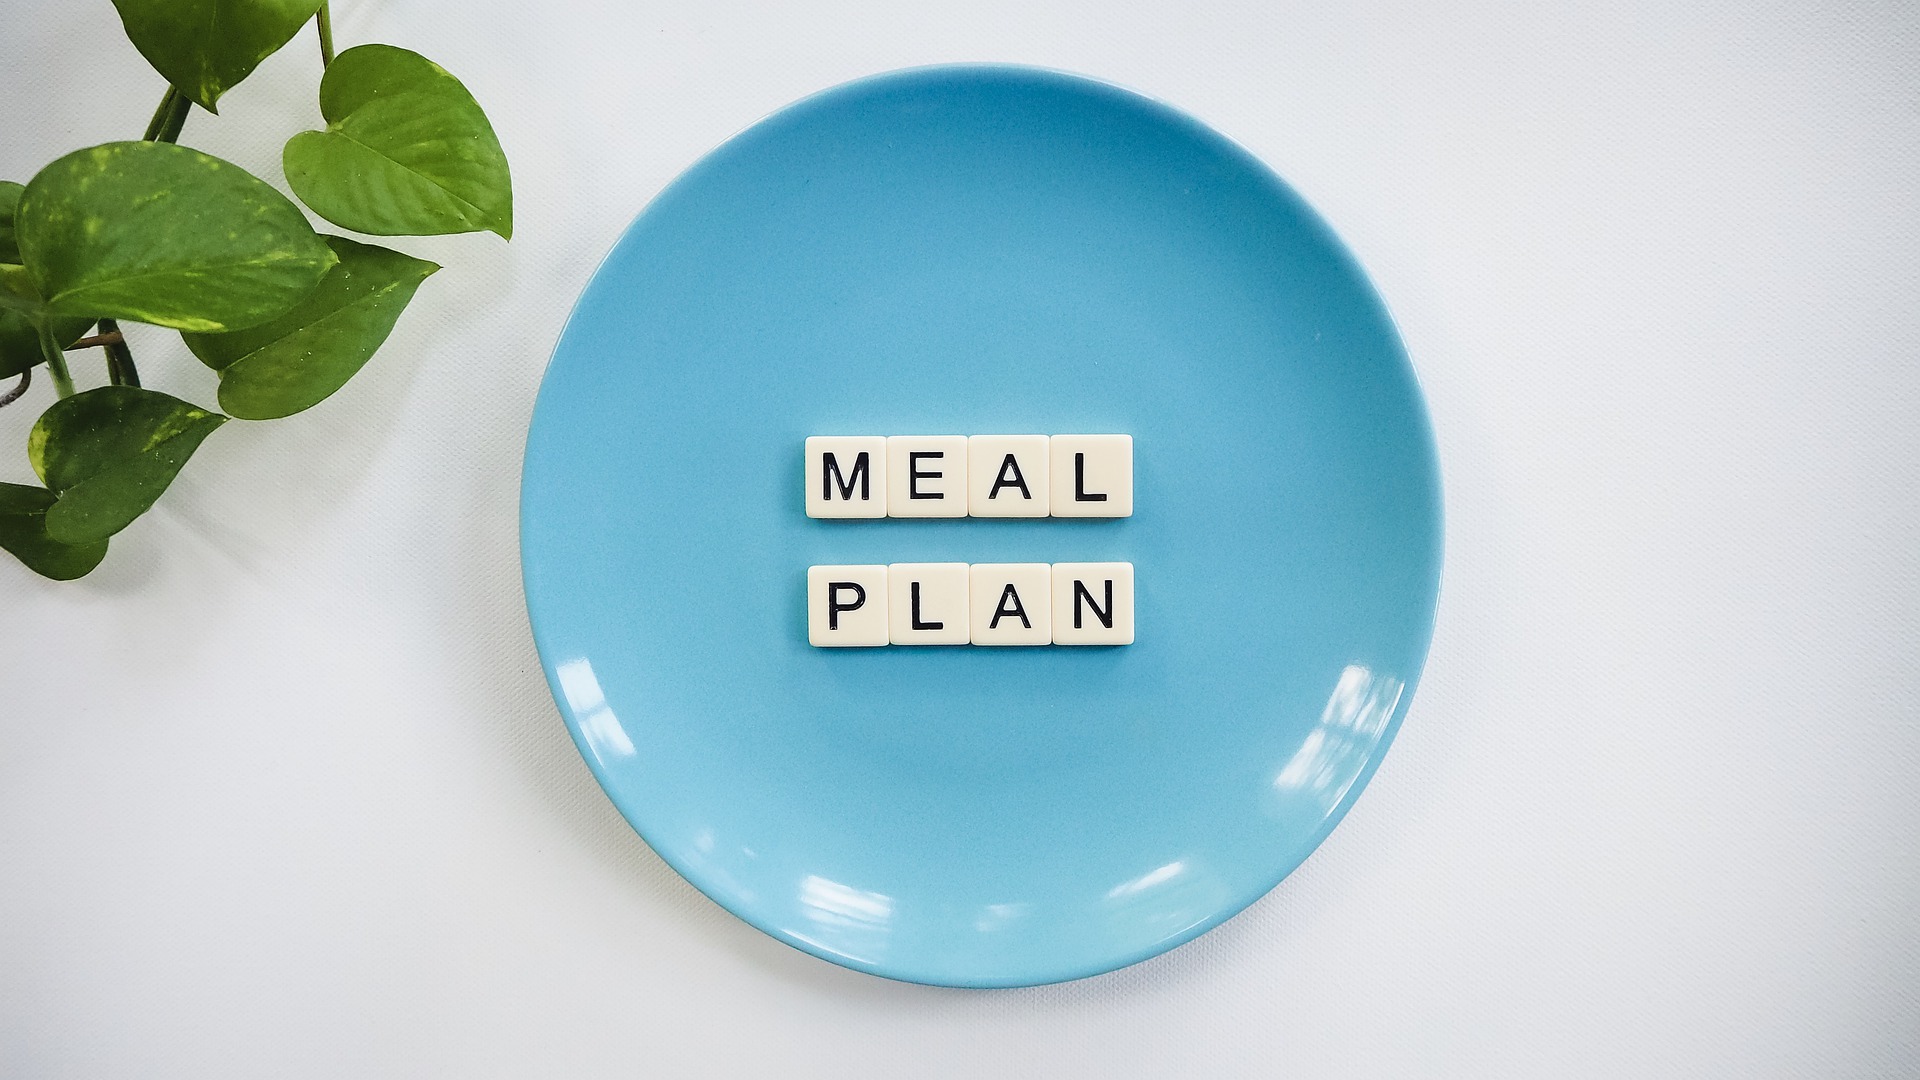 Photograph of a blue plate with tiles spelling "meal plan" on it used to illustrate, "